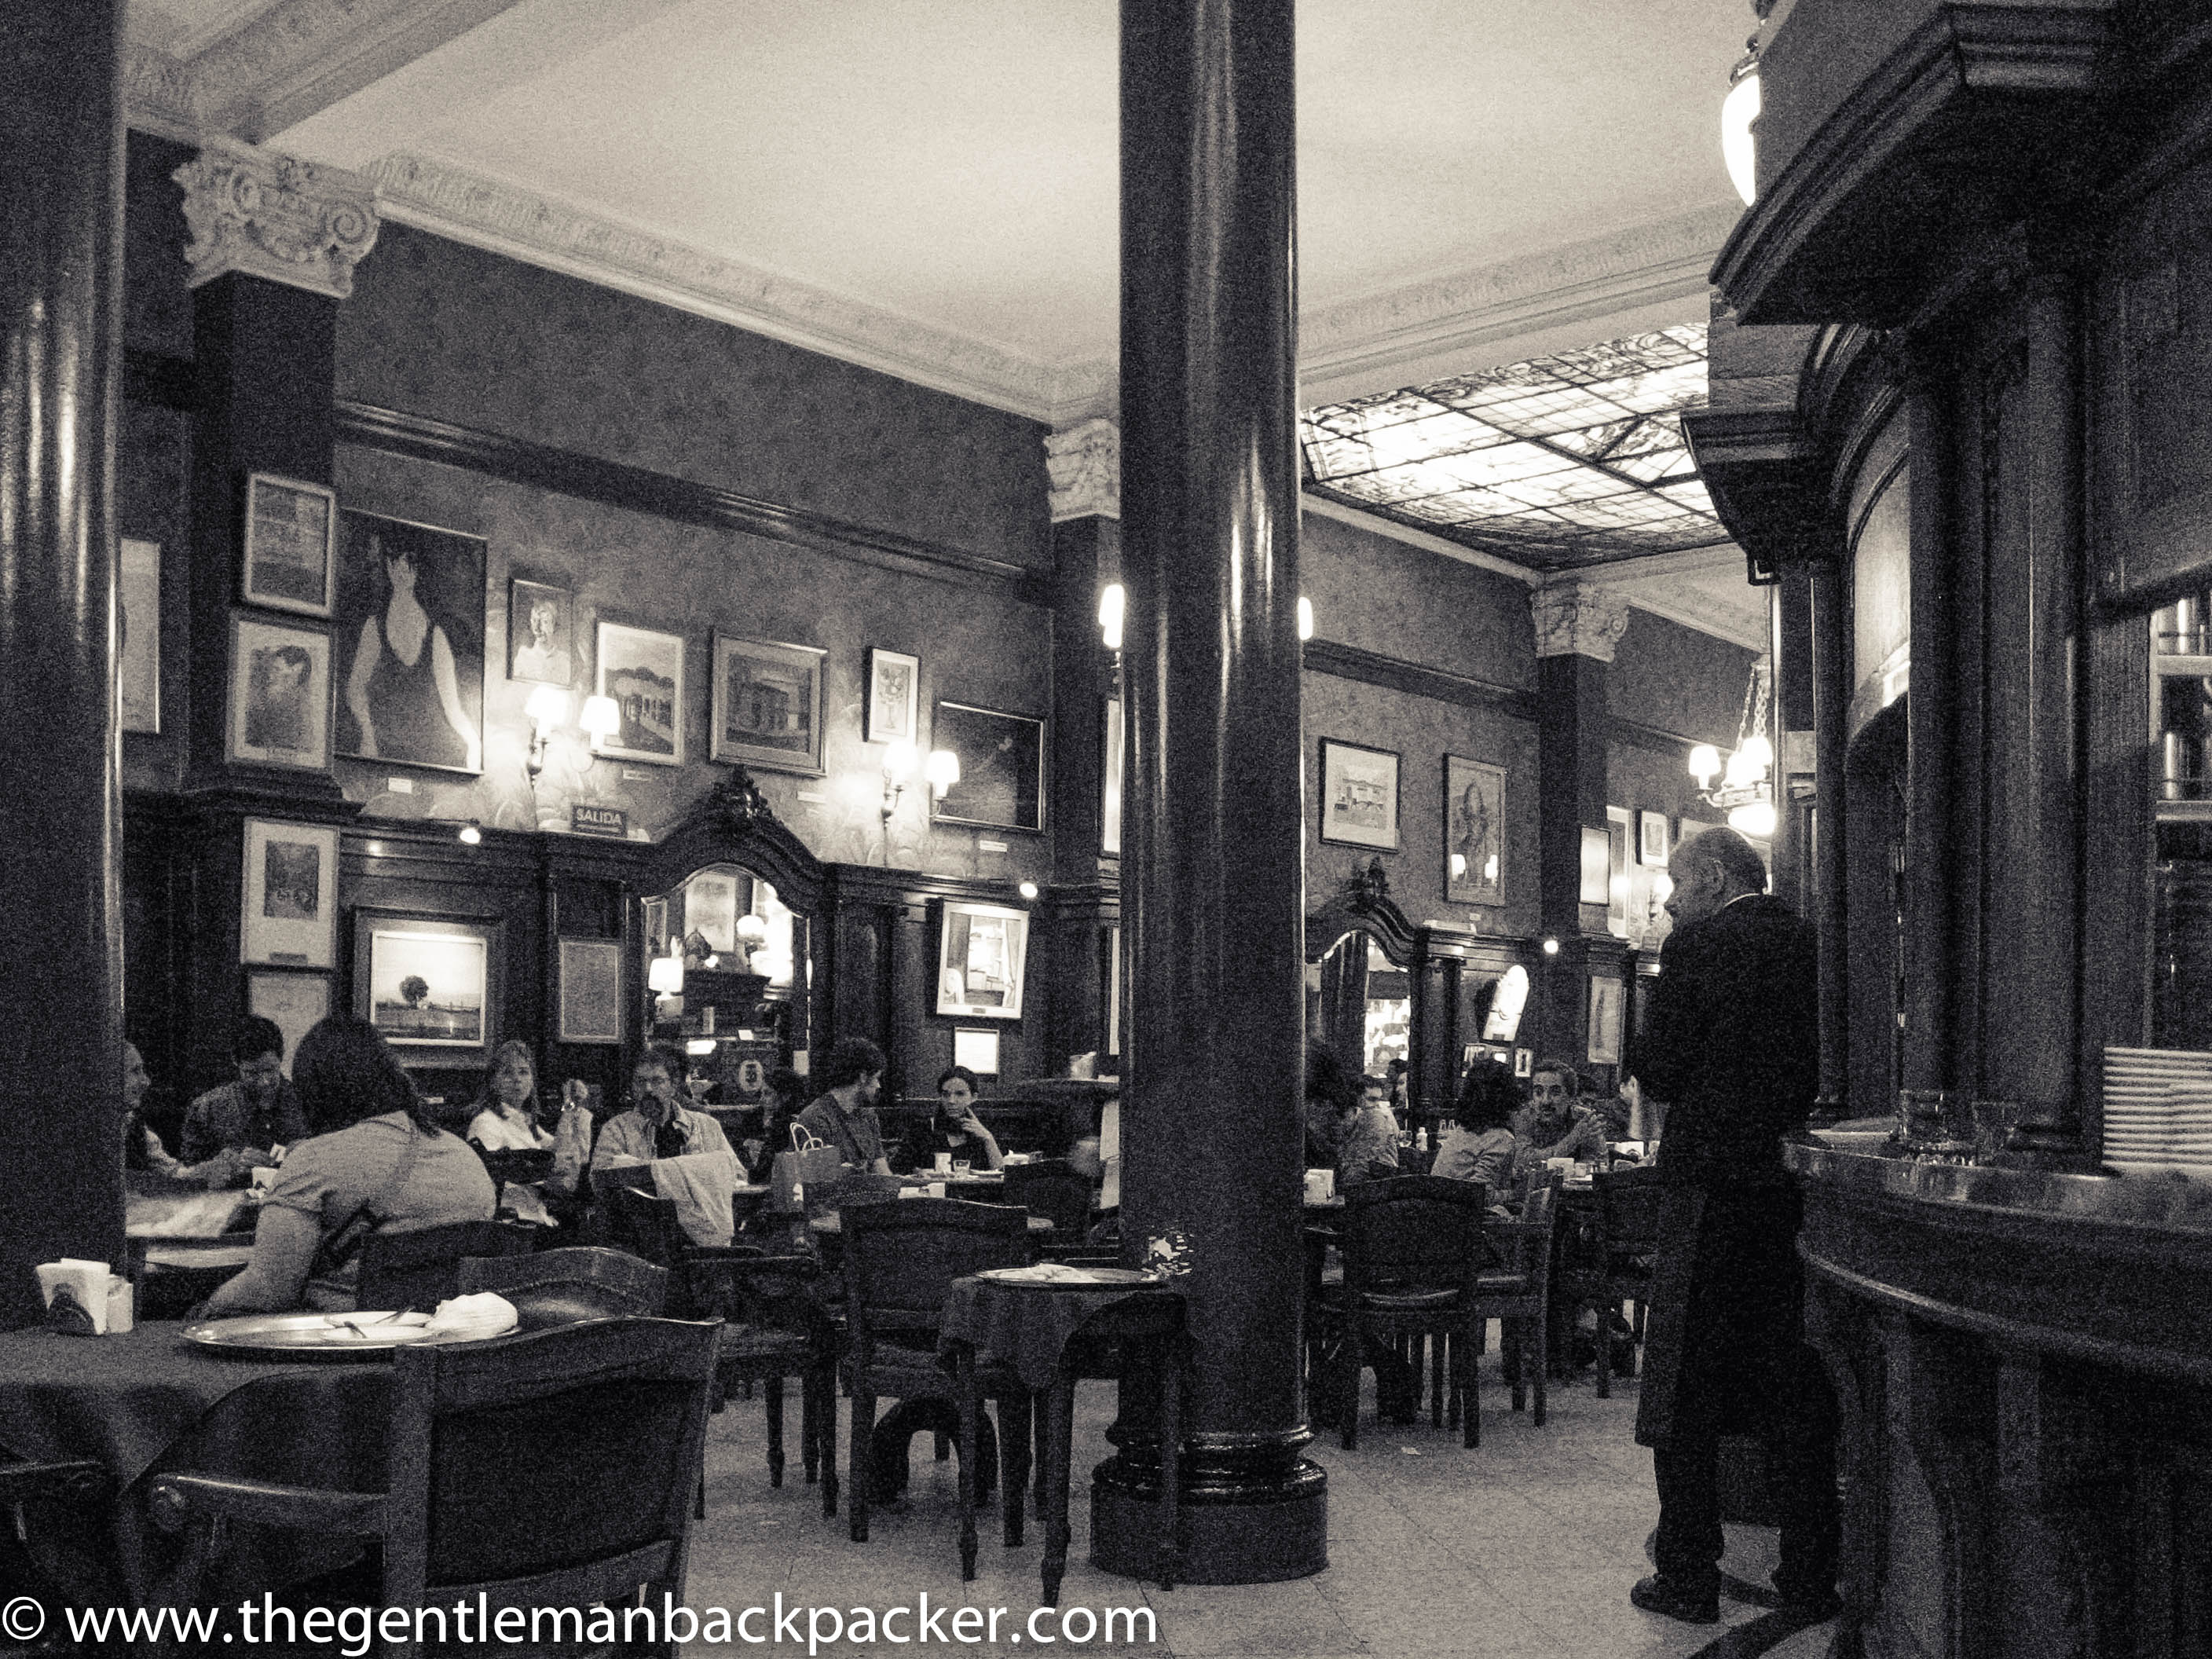 A little classic Old World-style charm at Cafe Tortoni